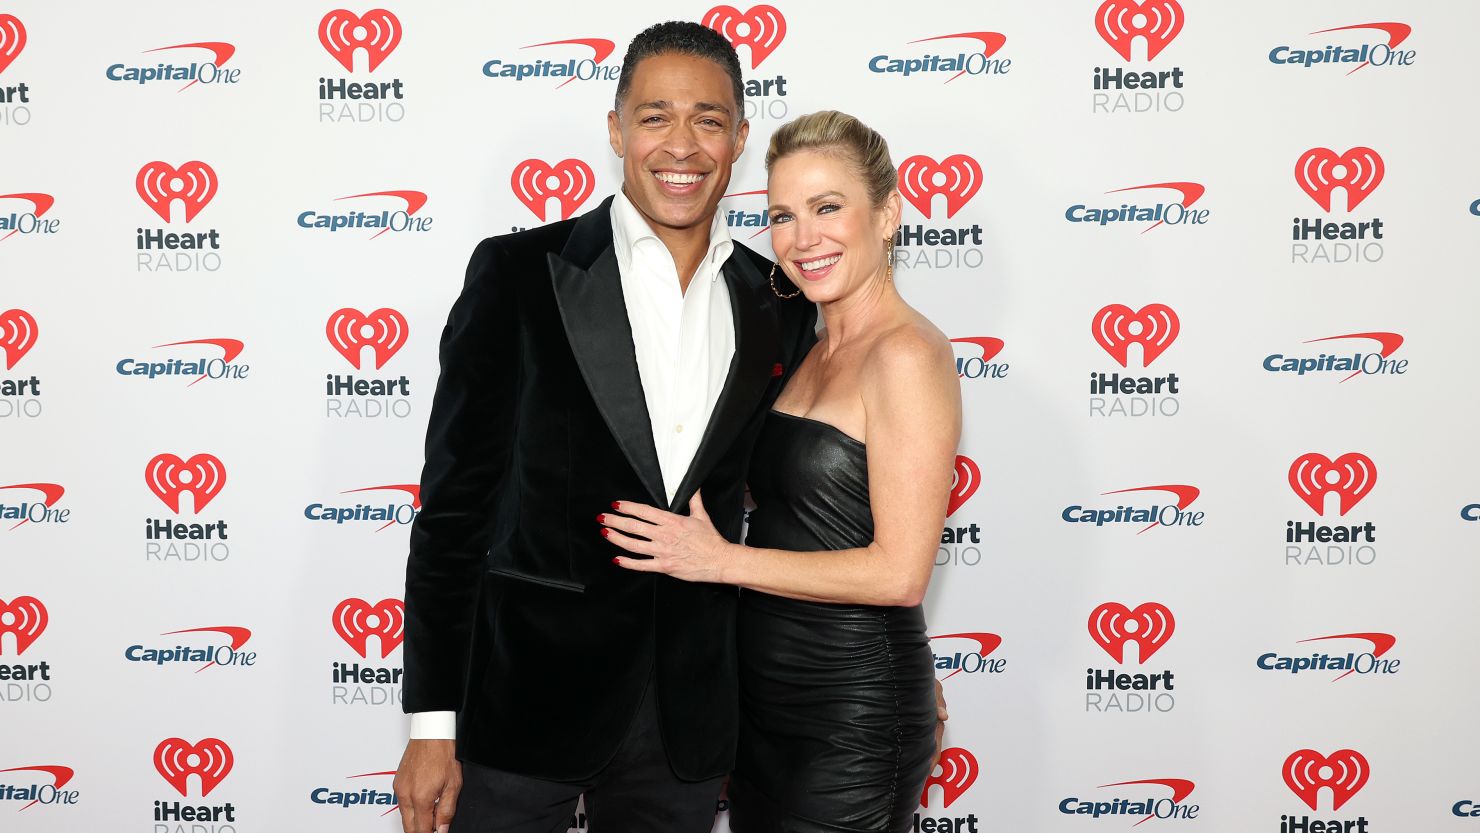 Amy Robach And T.J. Holmes Address Exes’ Dating Rumors